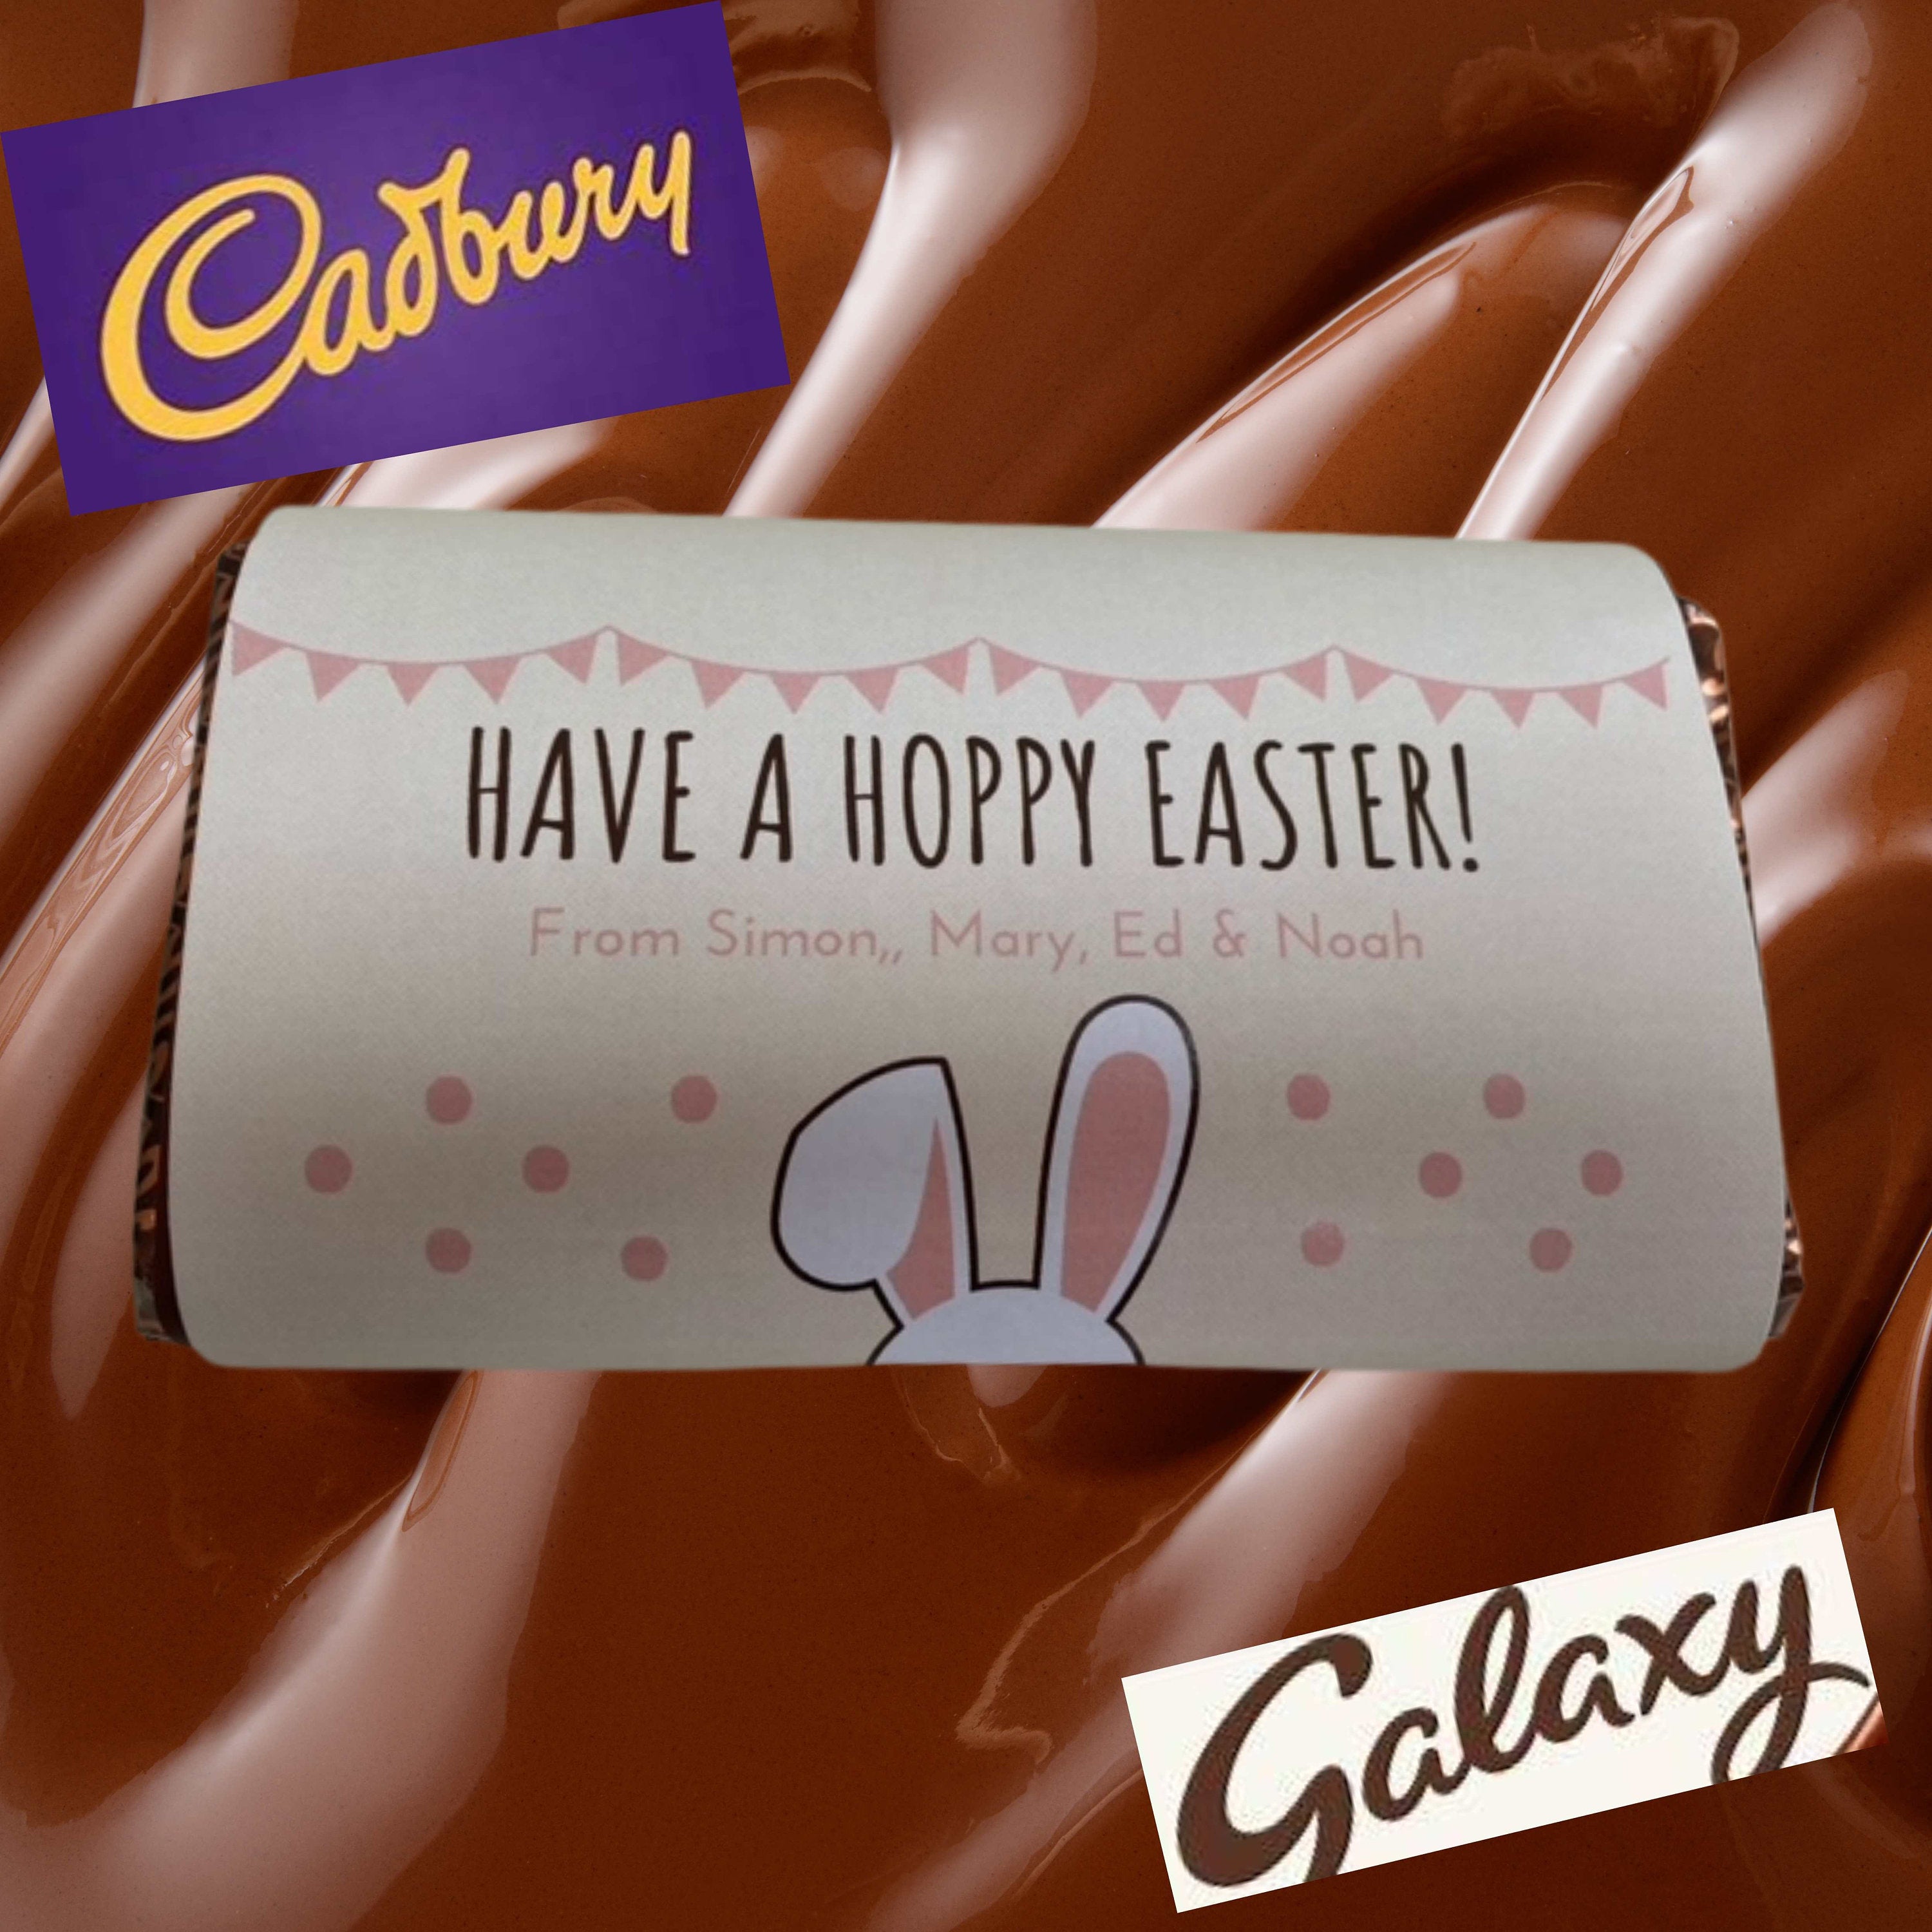 Personalised Hoppy Easter wrapped Chocolate Bar choose from Galaxy or Cadburys